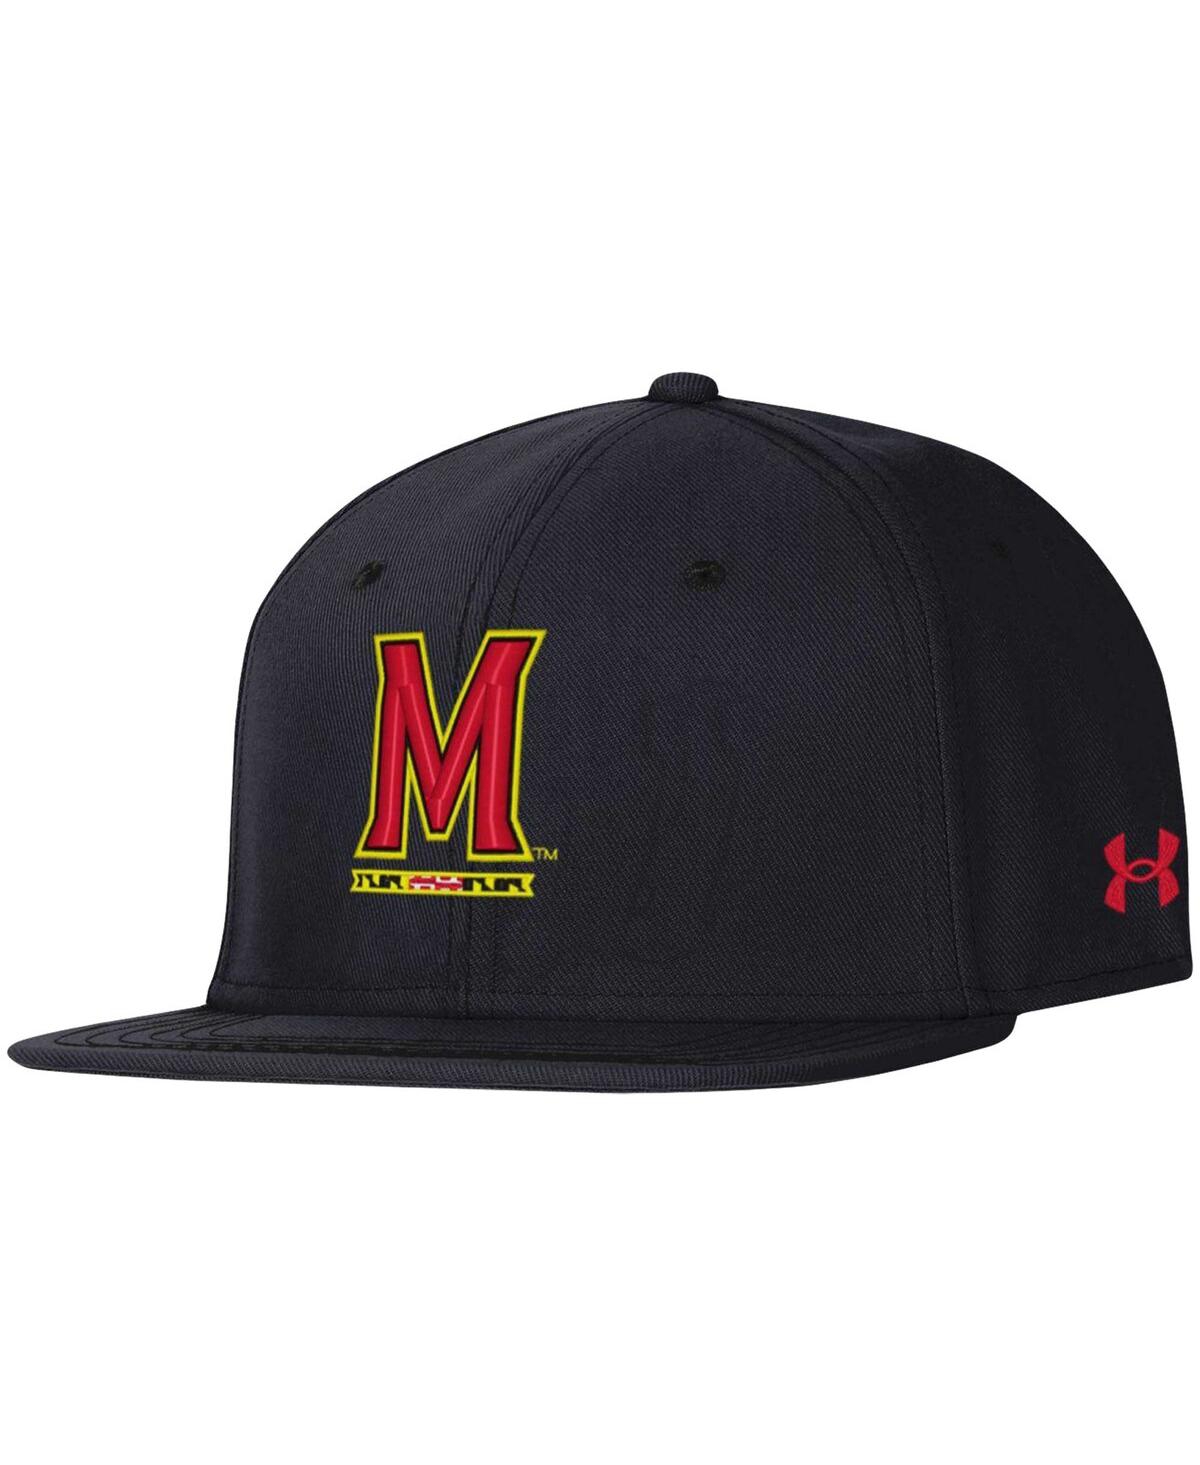 UNDER ARMOUR MEN'S UNDER ARMOUR BLACK MARYLAND TERRAPINS BASEBALL FITTED HAT